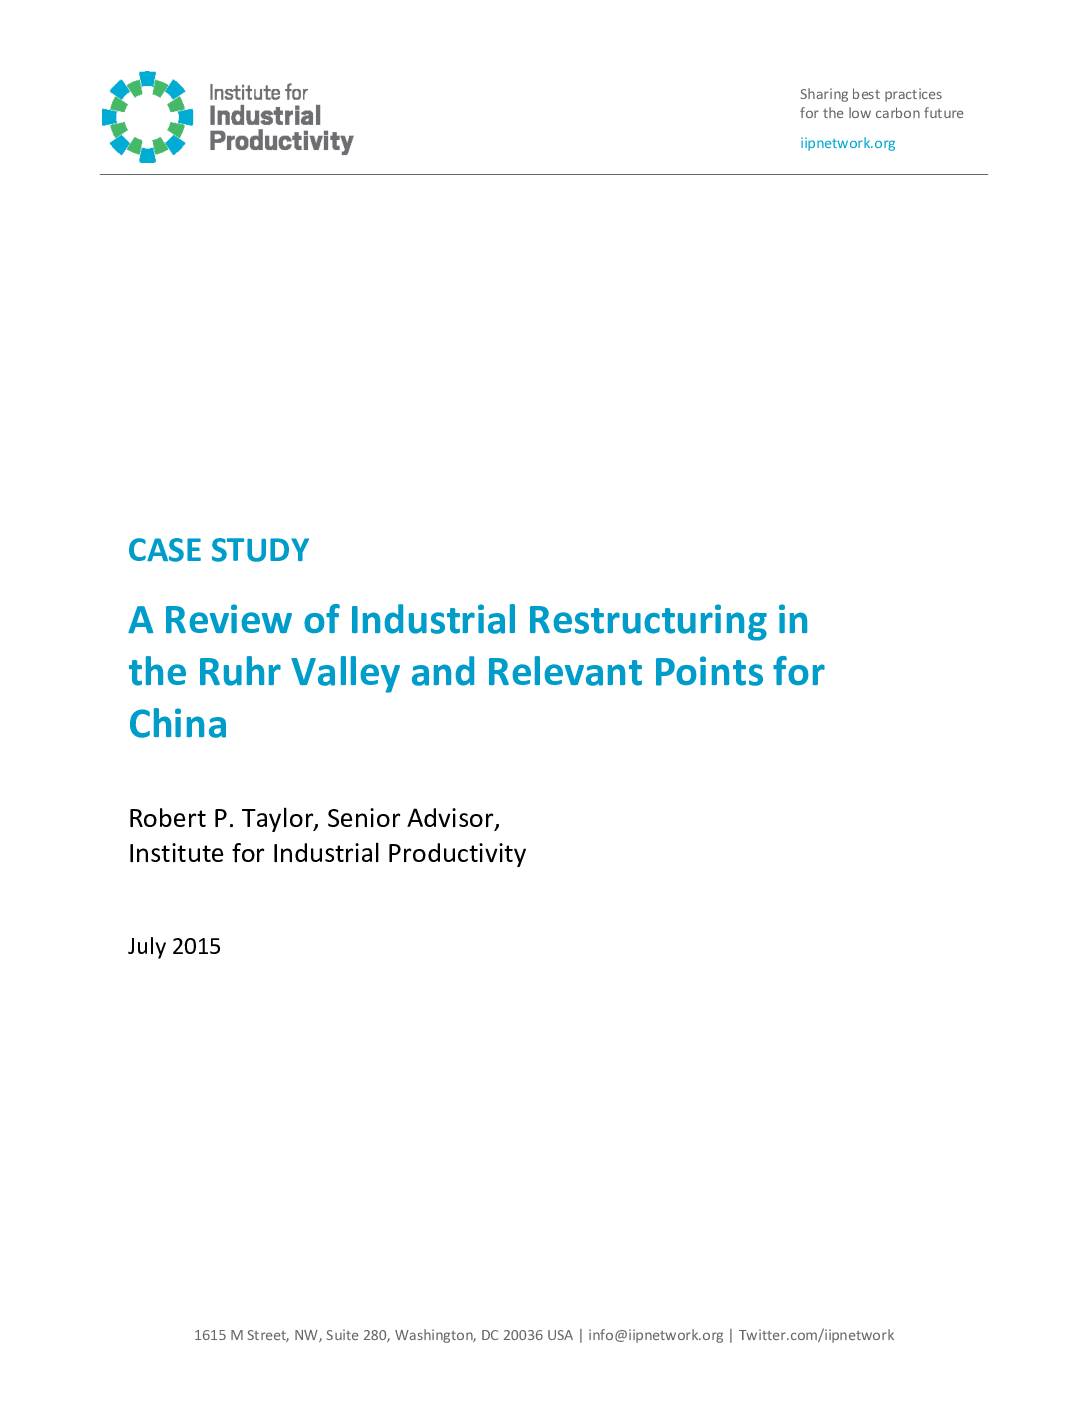 Case Study: A Review of Industrial Restructuring in the Ruhr Valley and Relevant Points for China